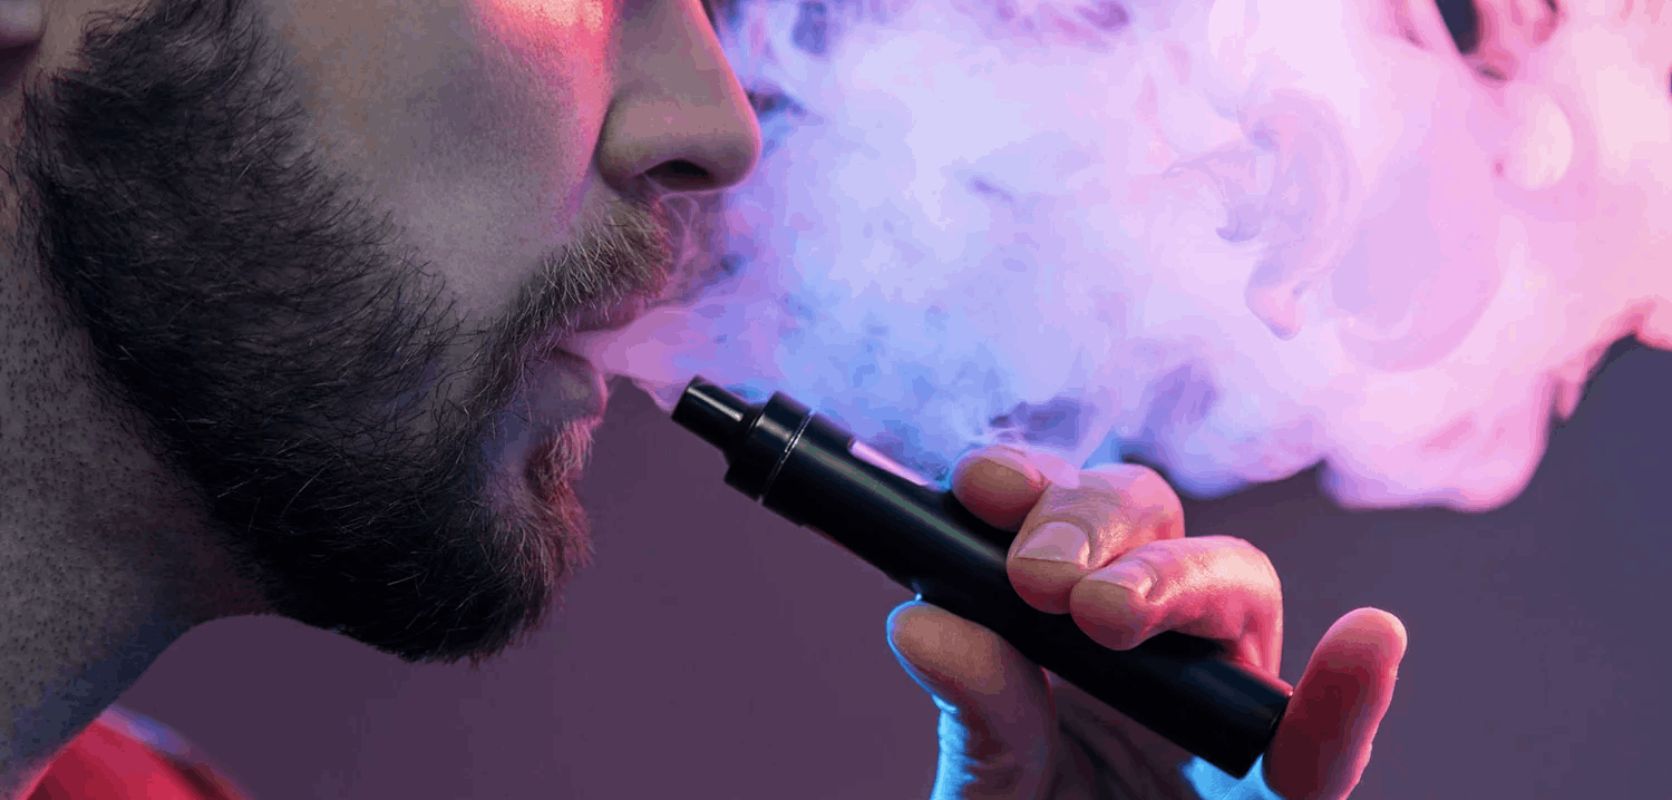 THC vape refers to a vaporizer device used to inhale THC (tetrahydrocannabinol) oil, which is the main psychoactive compound in cannabis plants. 